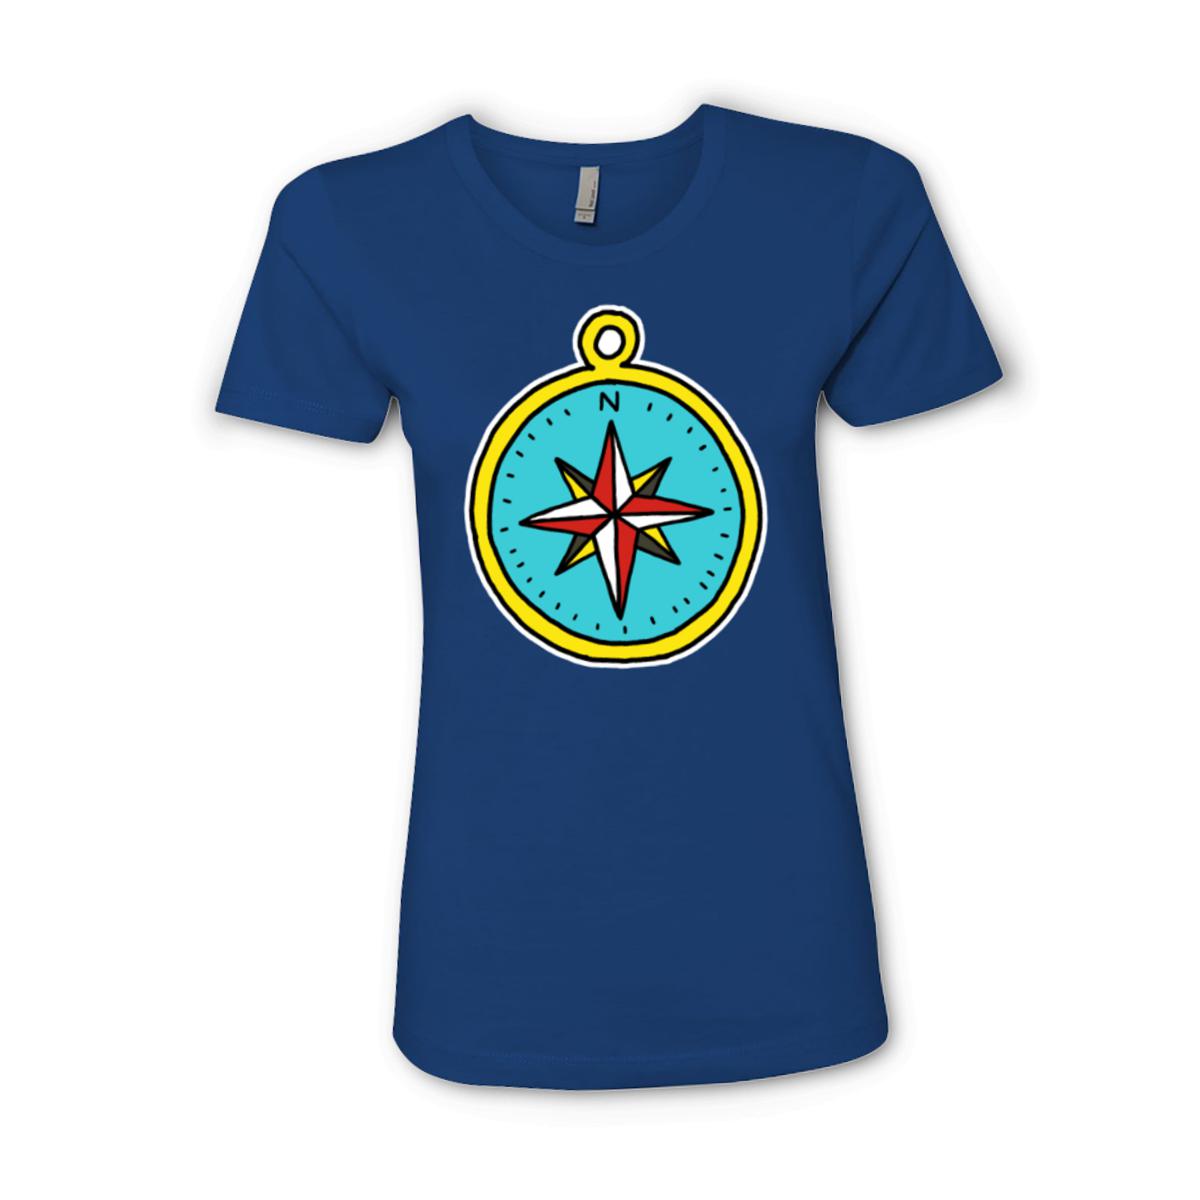 American Traditional Compass Ladies' Boyfriend Tee Large royal-blue